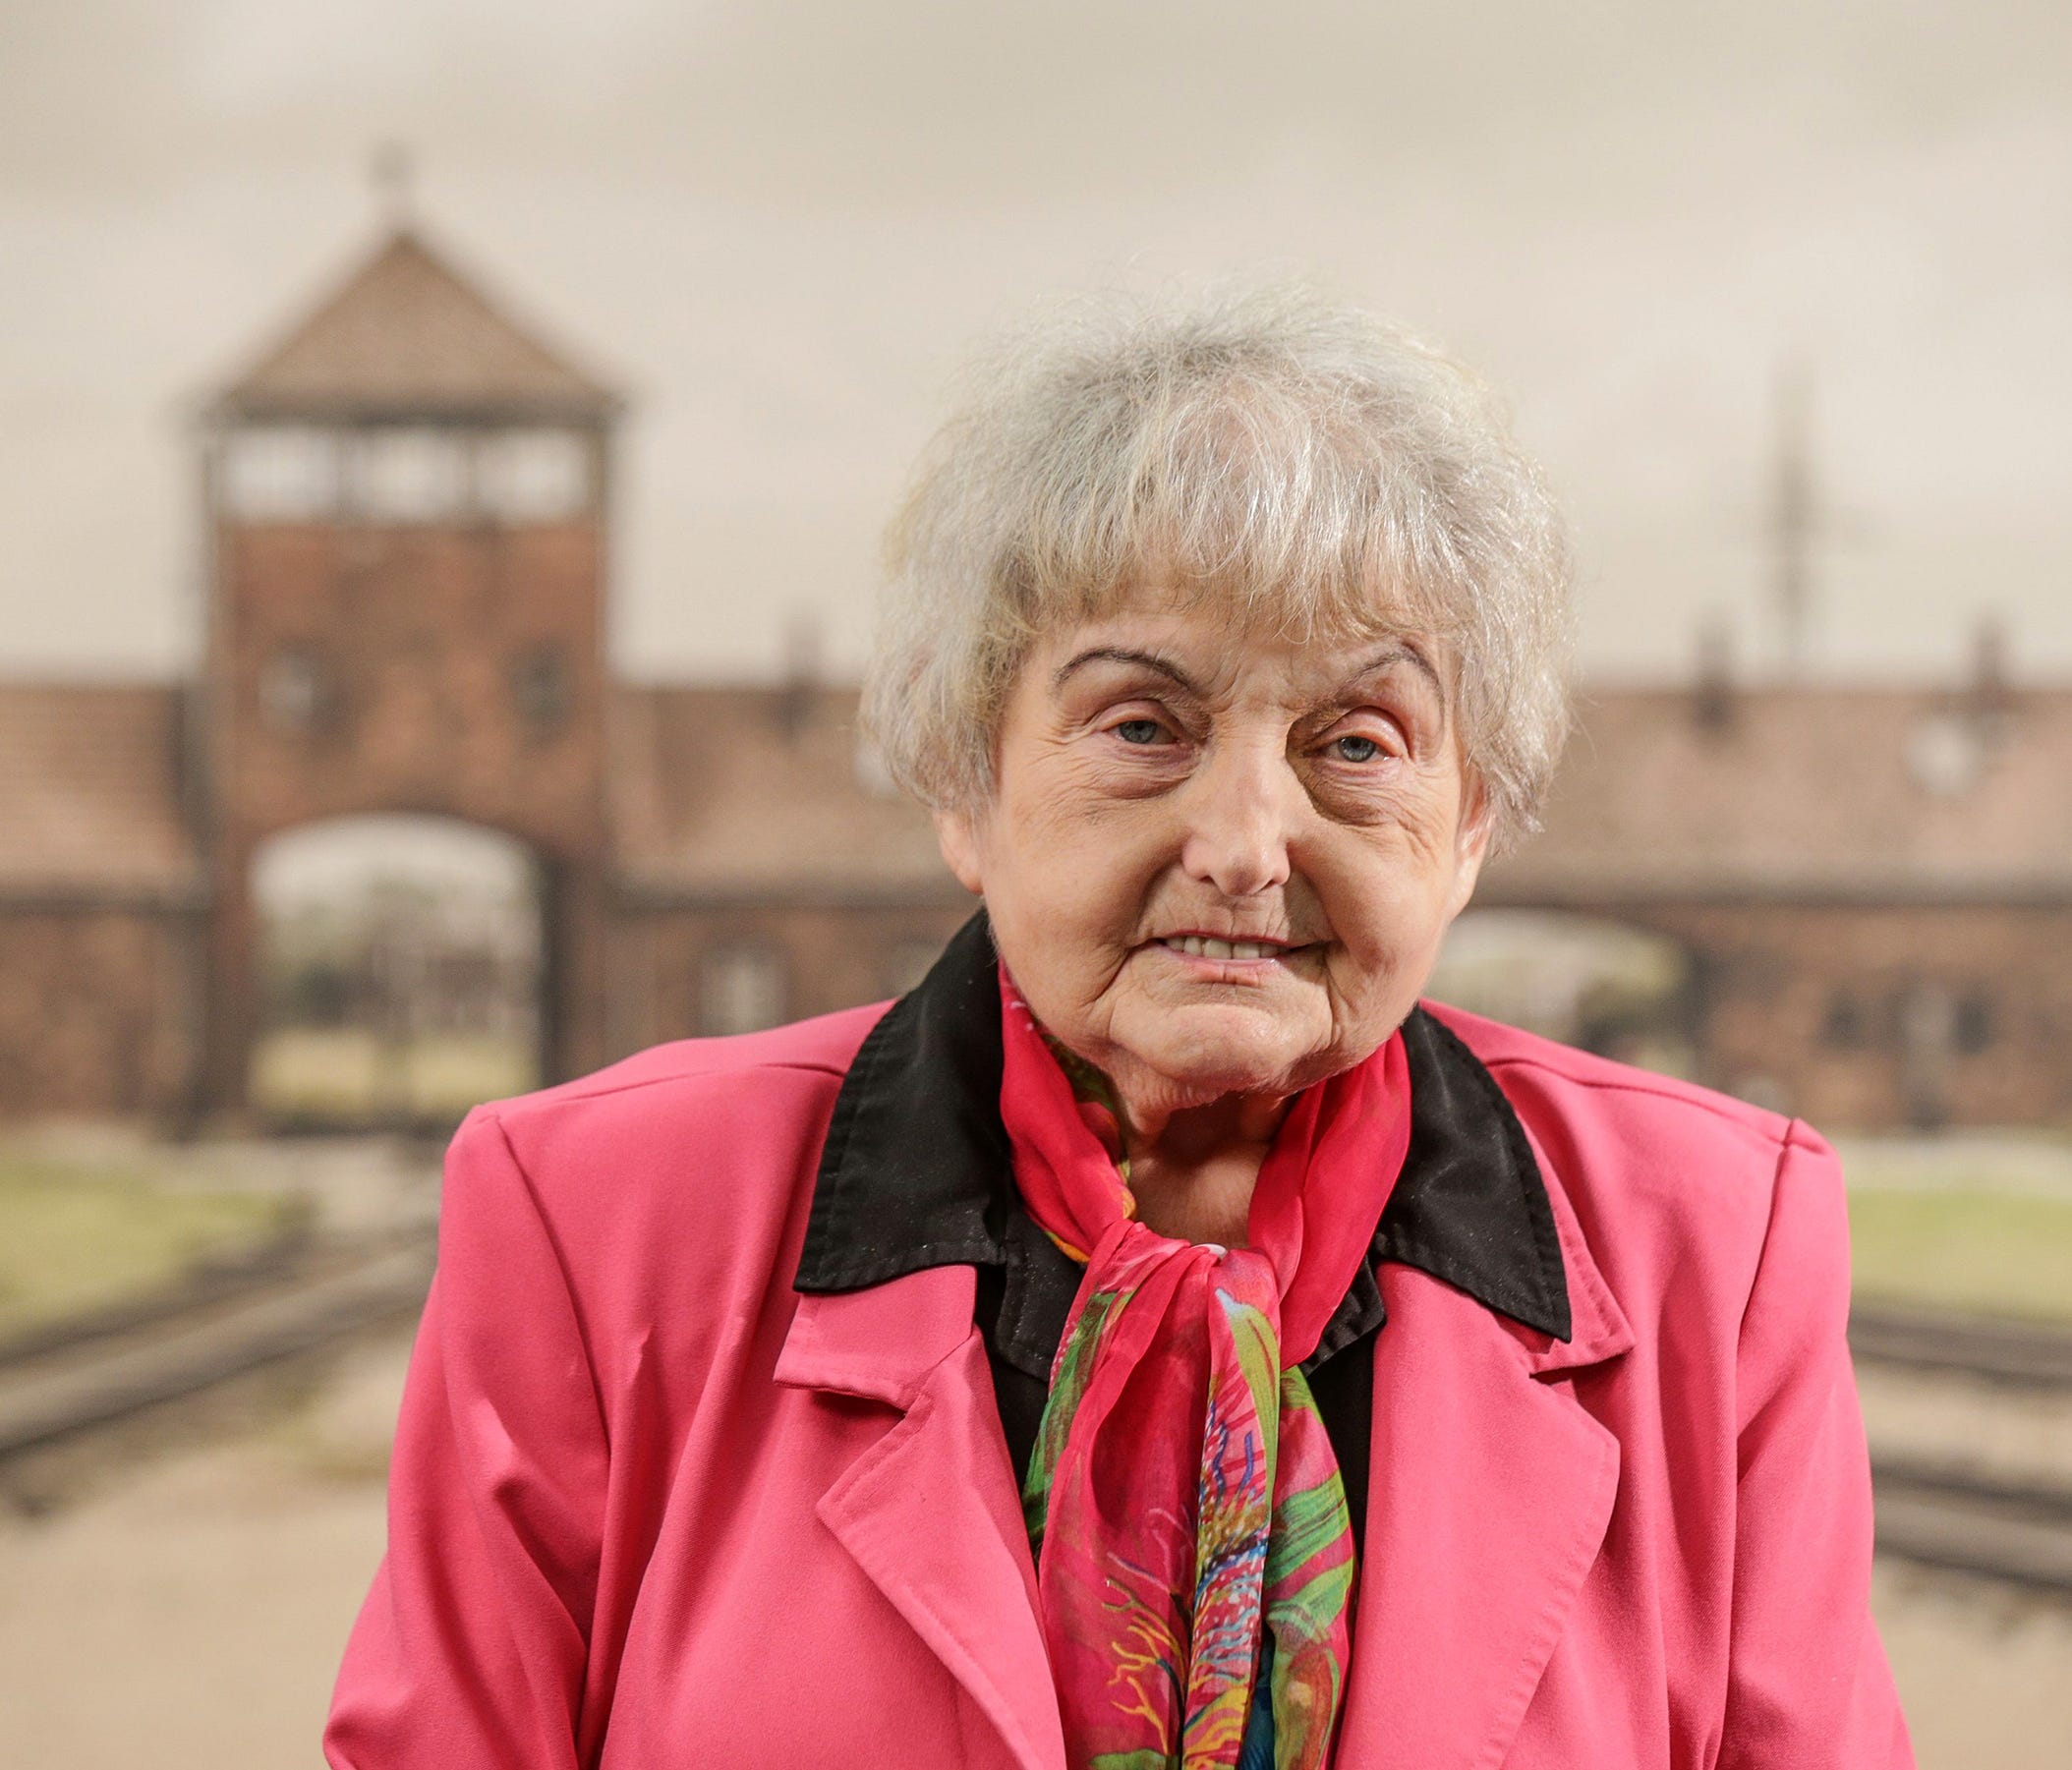 Holocaust survivor Eva Mozes Kor stands April 6, 2017, in front of a contemporary photo of the selection platform at the Auschwitz-Birkenau camp on display at the CANDLES Holocaust Museum and Education Center in Terre Haute, Ind.